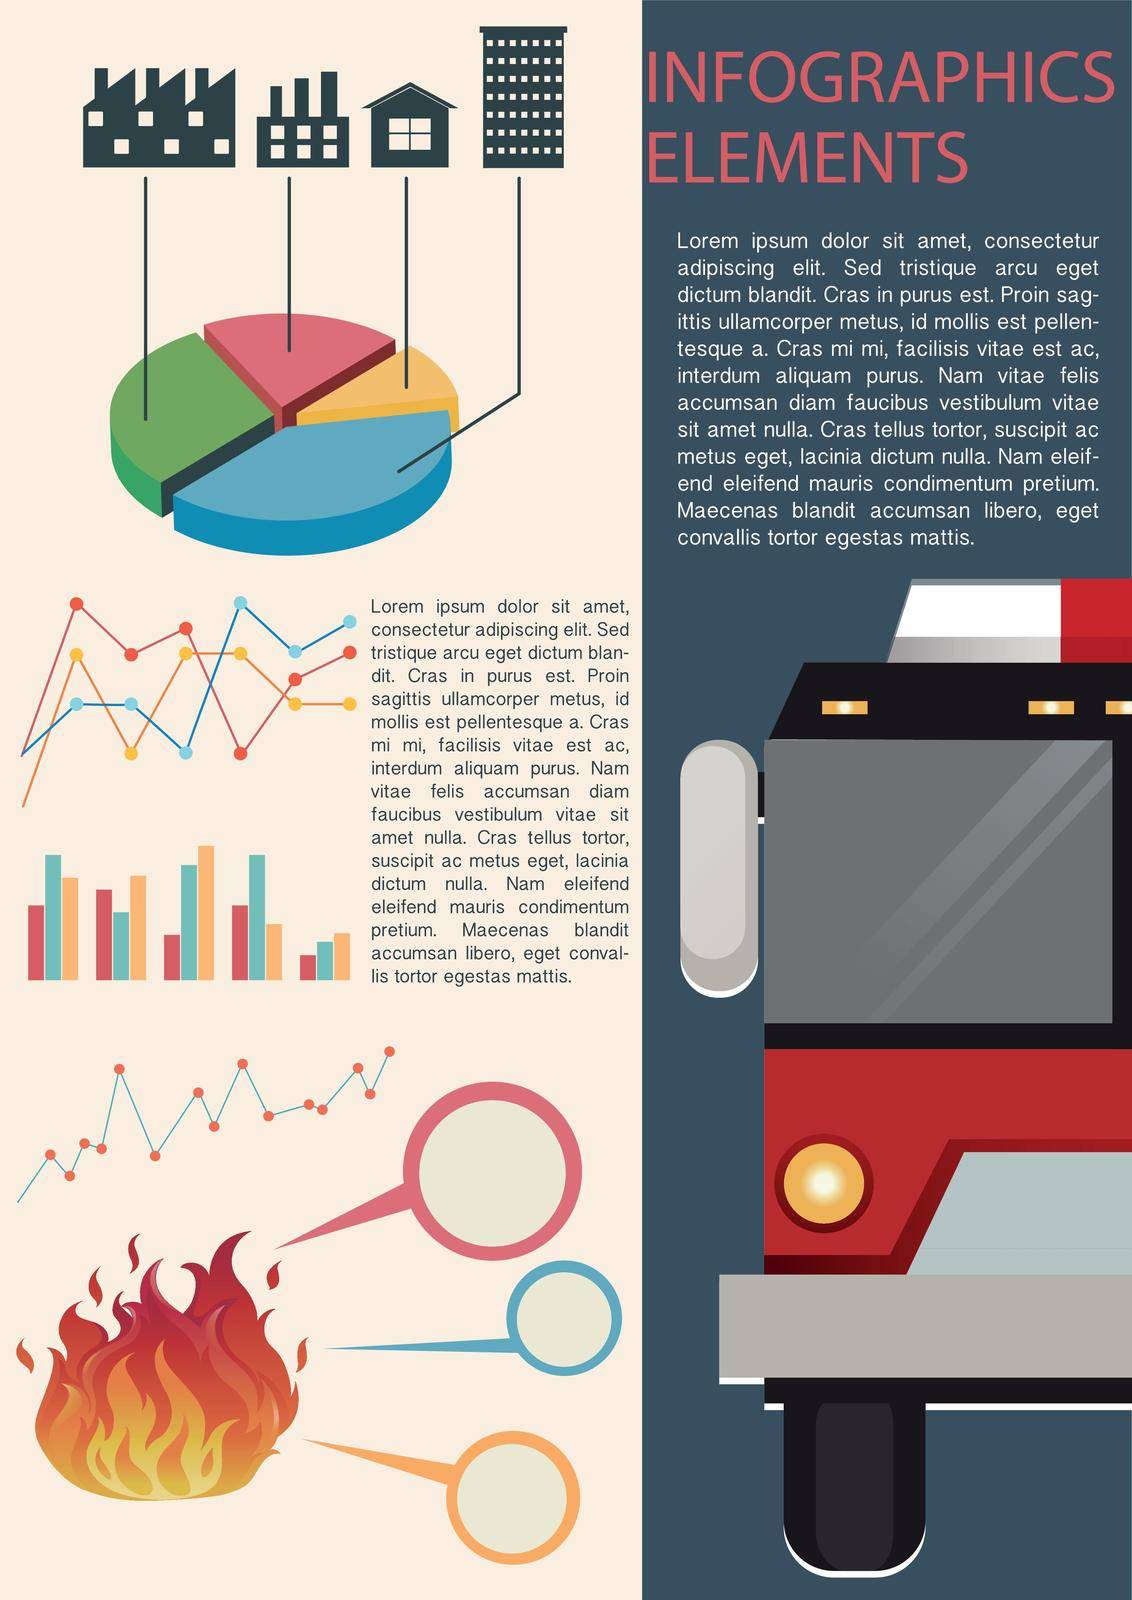 Infographics elements with different graphs